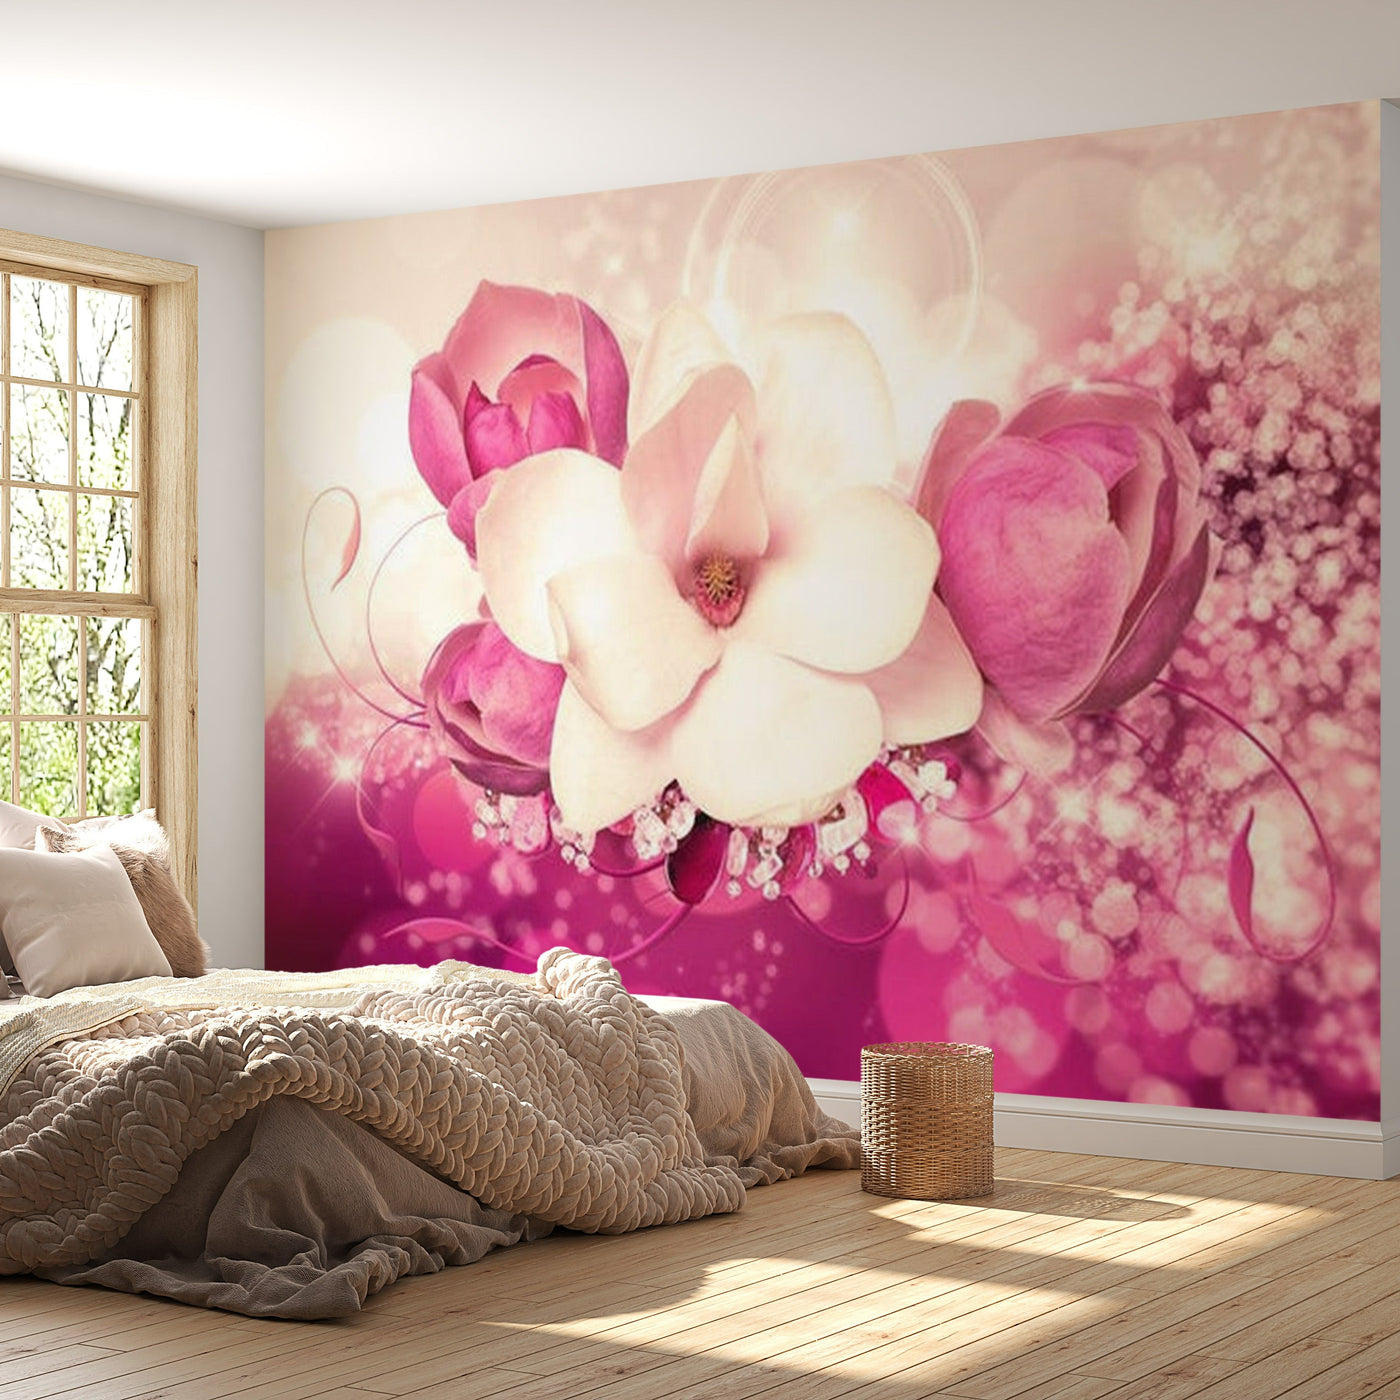 Floral Wallpaper Wall Mural - Amaranthine Admiration